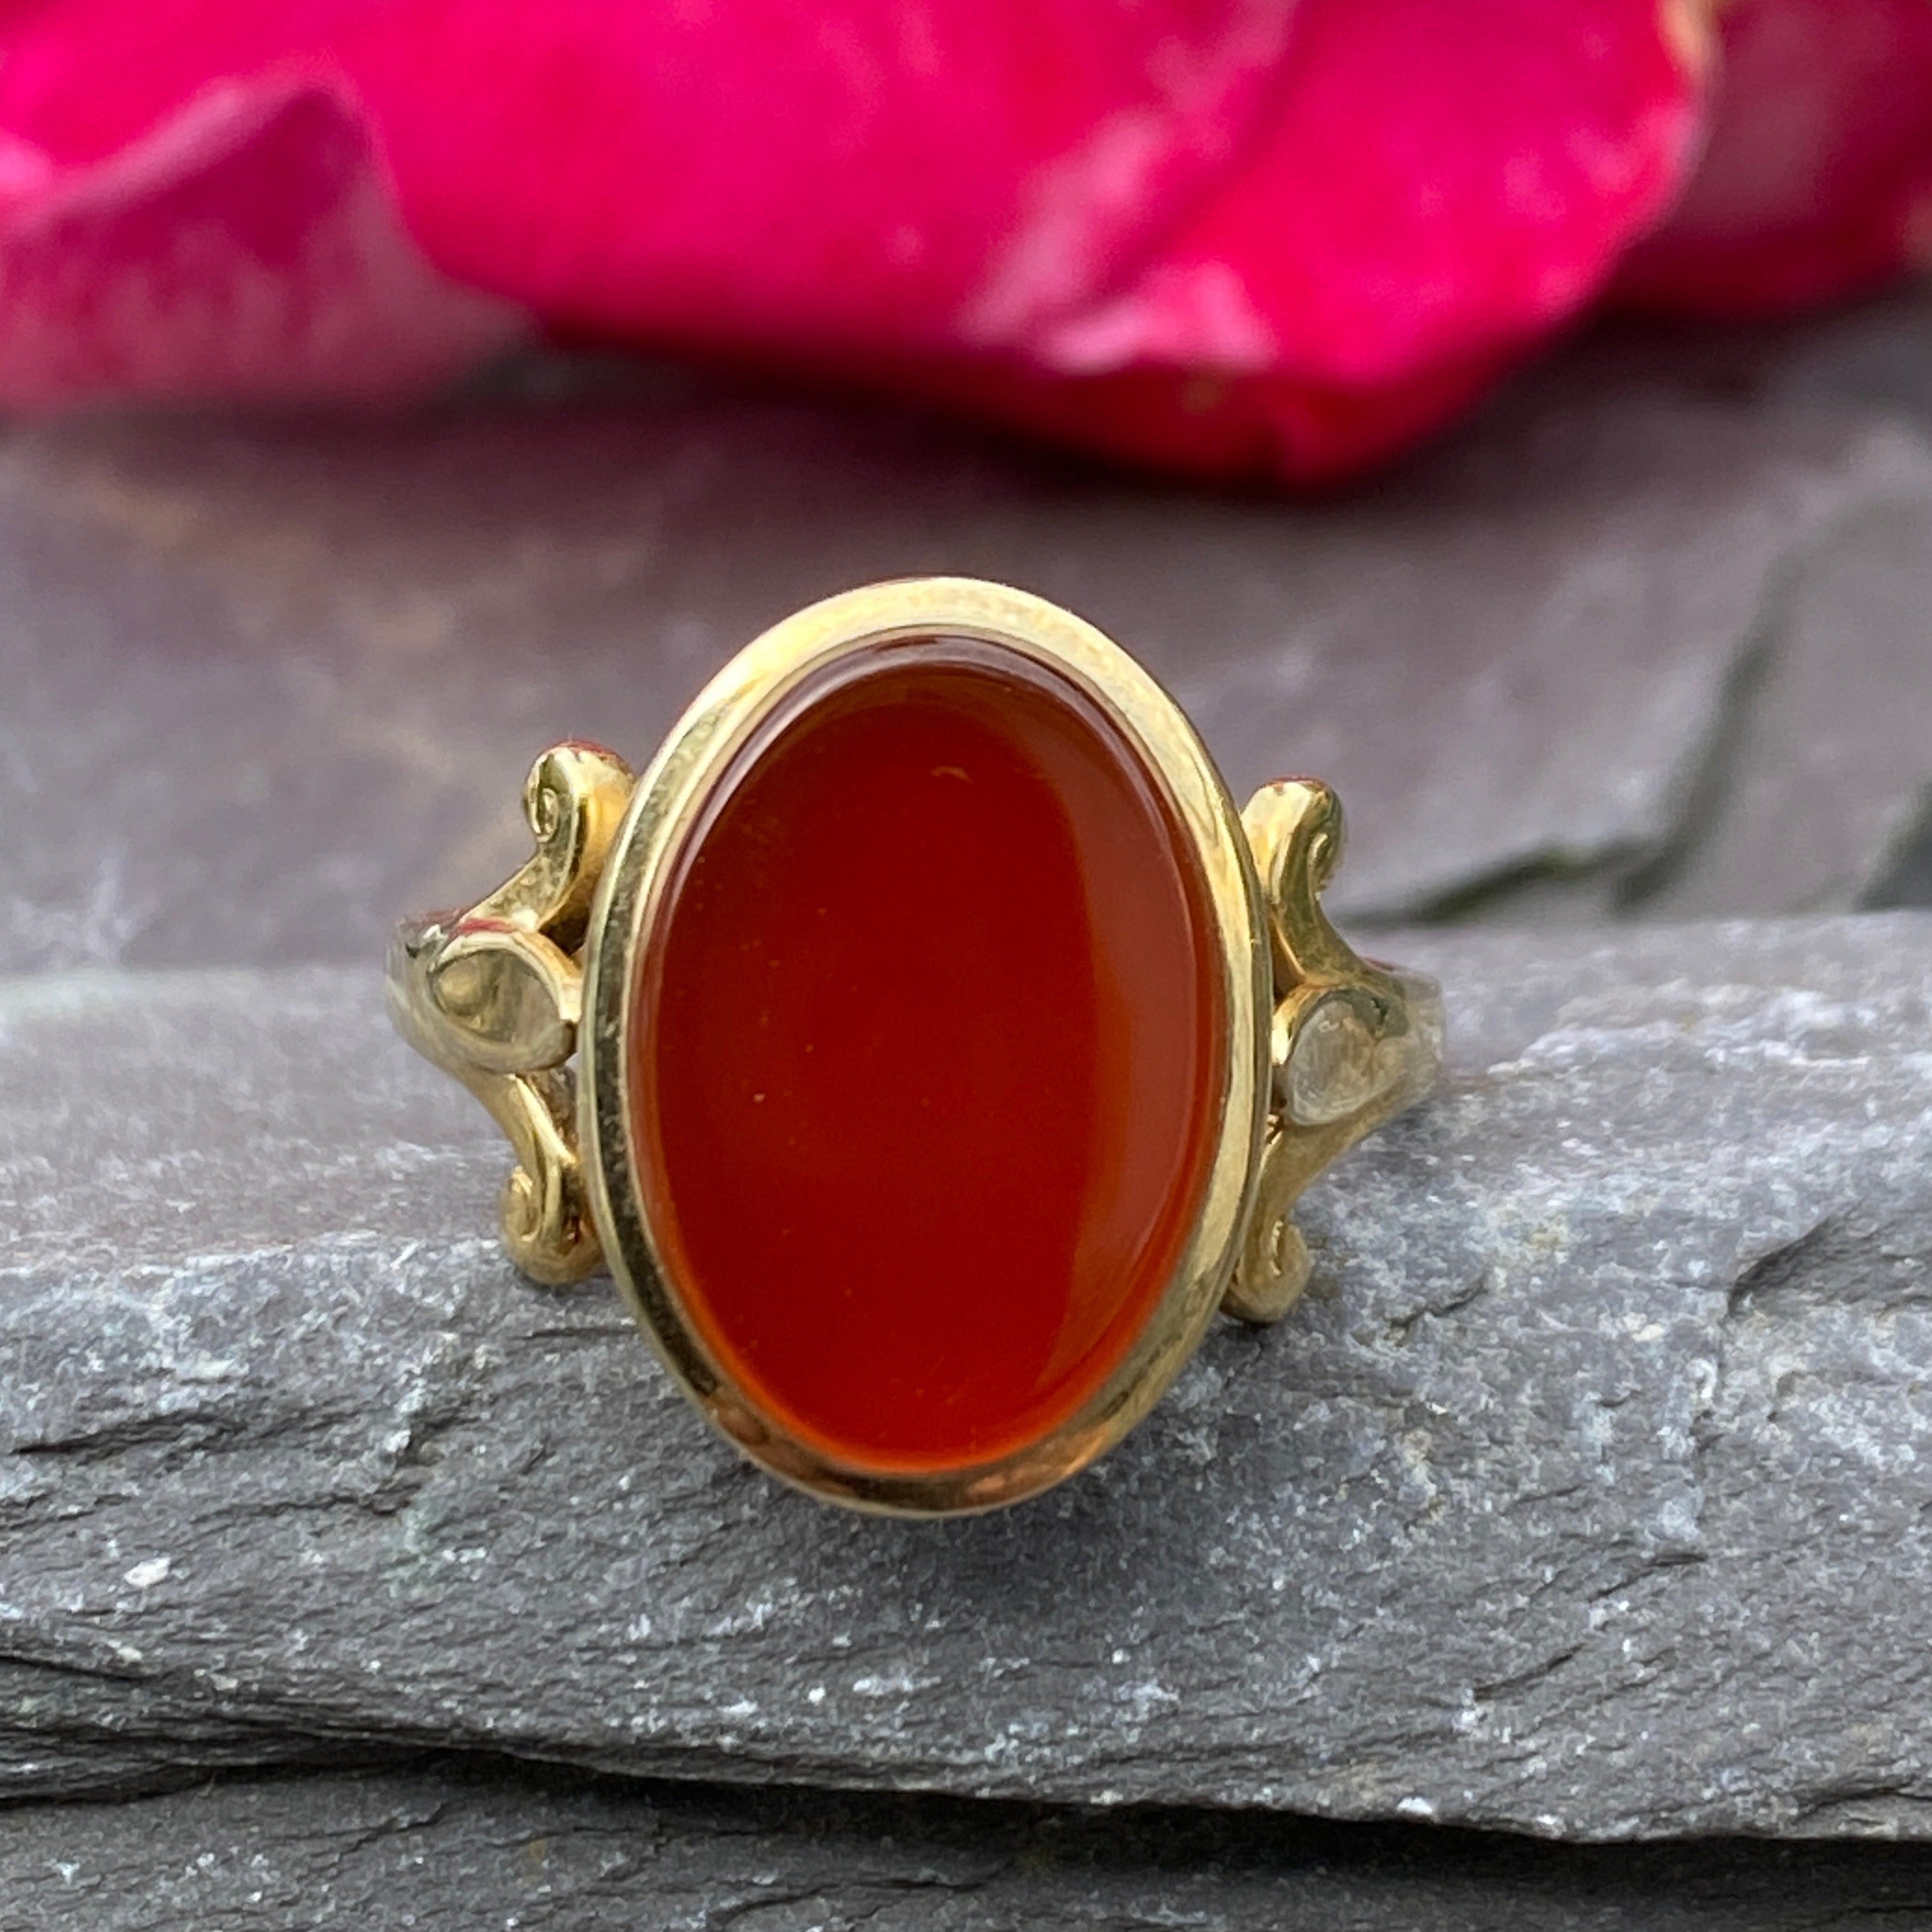 9ct Gold Carnelian Signet Ring Size M 1/2 or 6 3/4 US